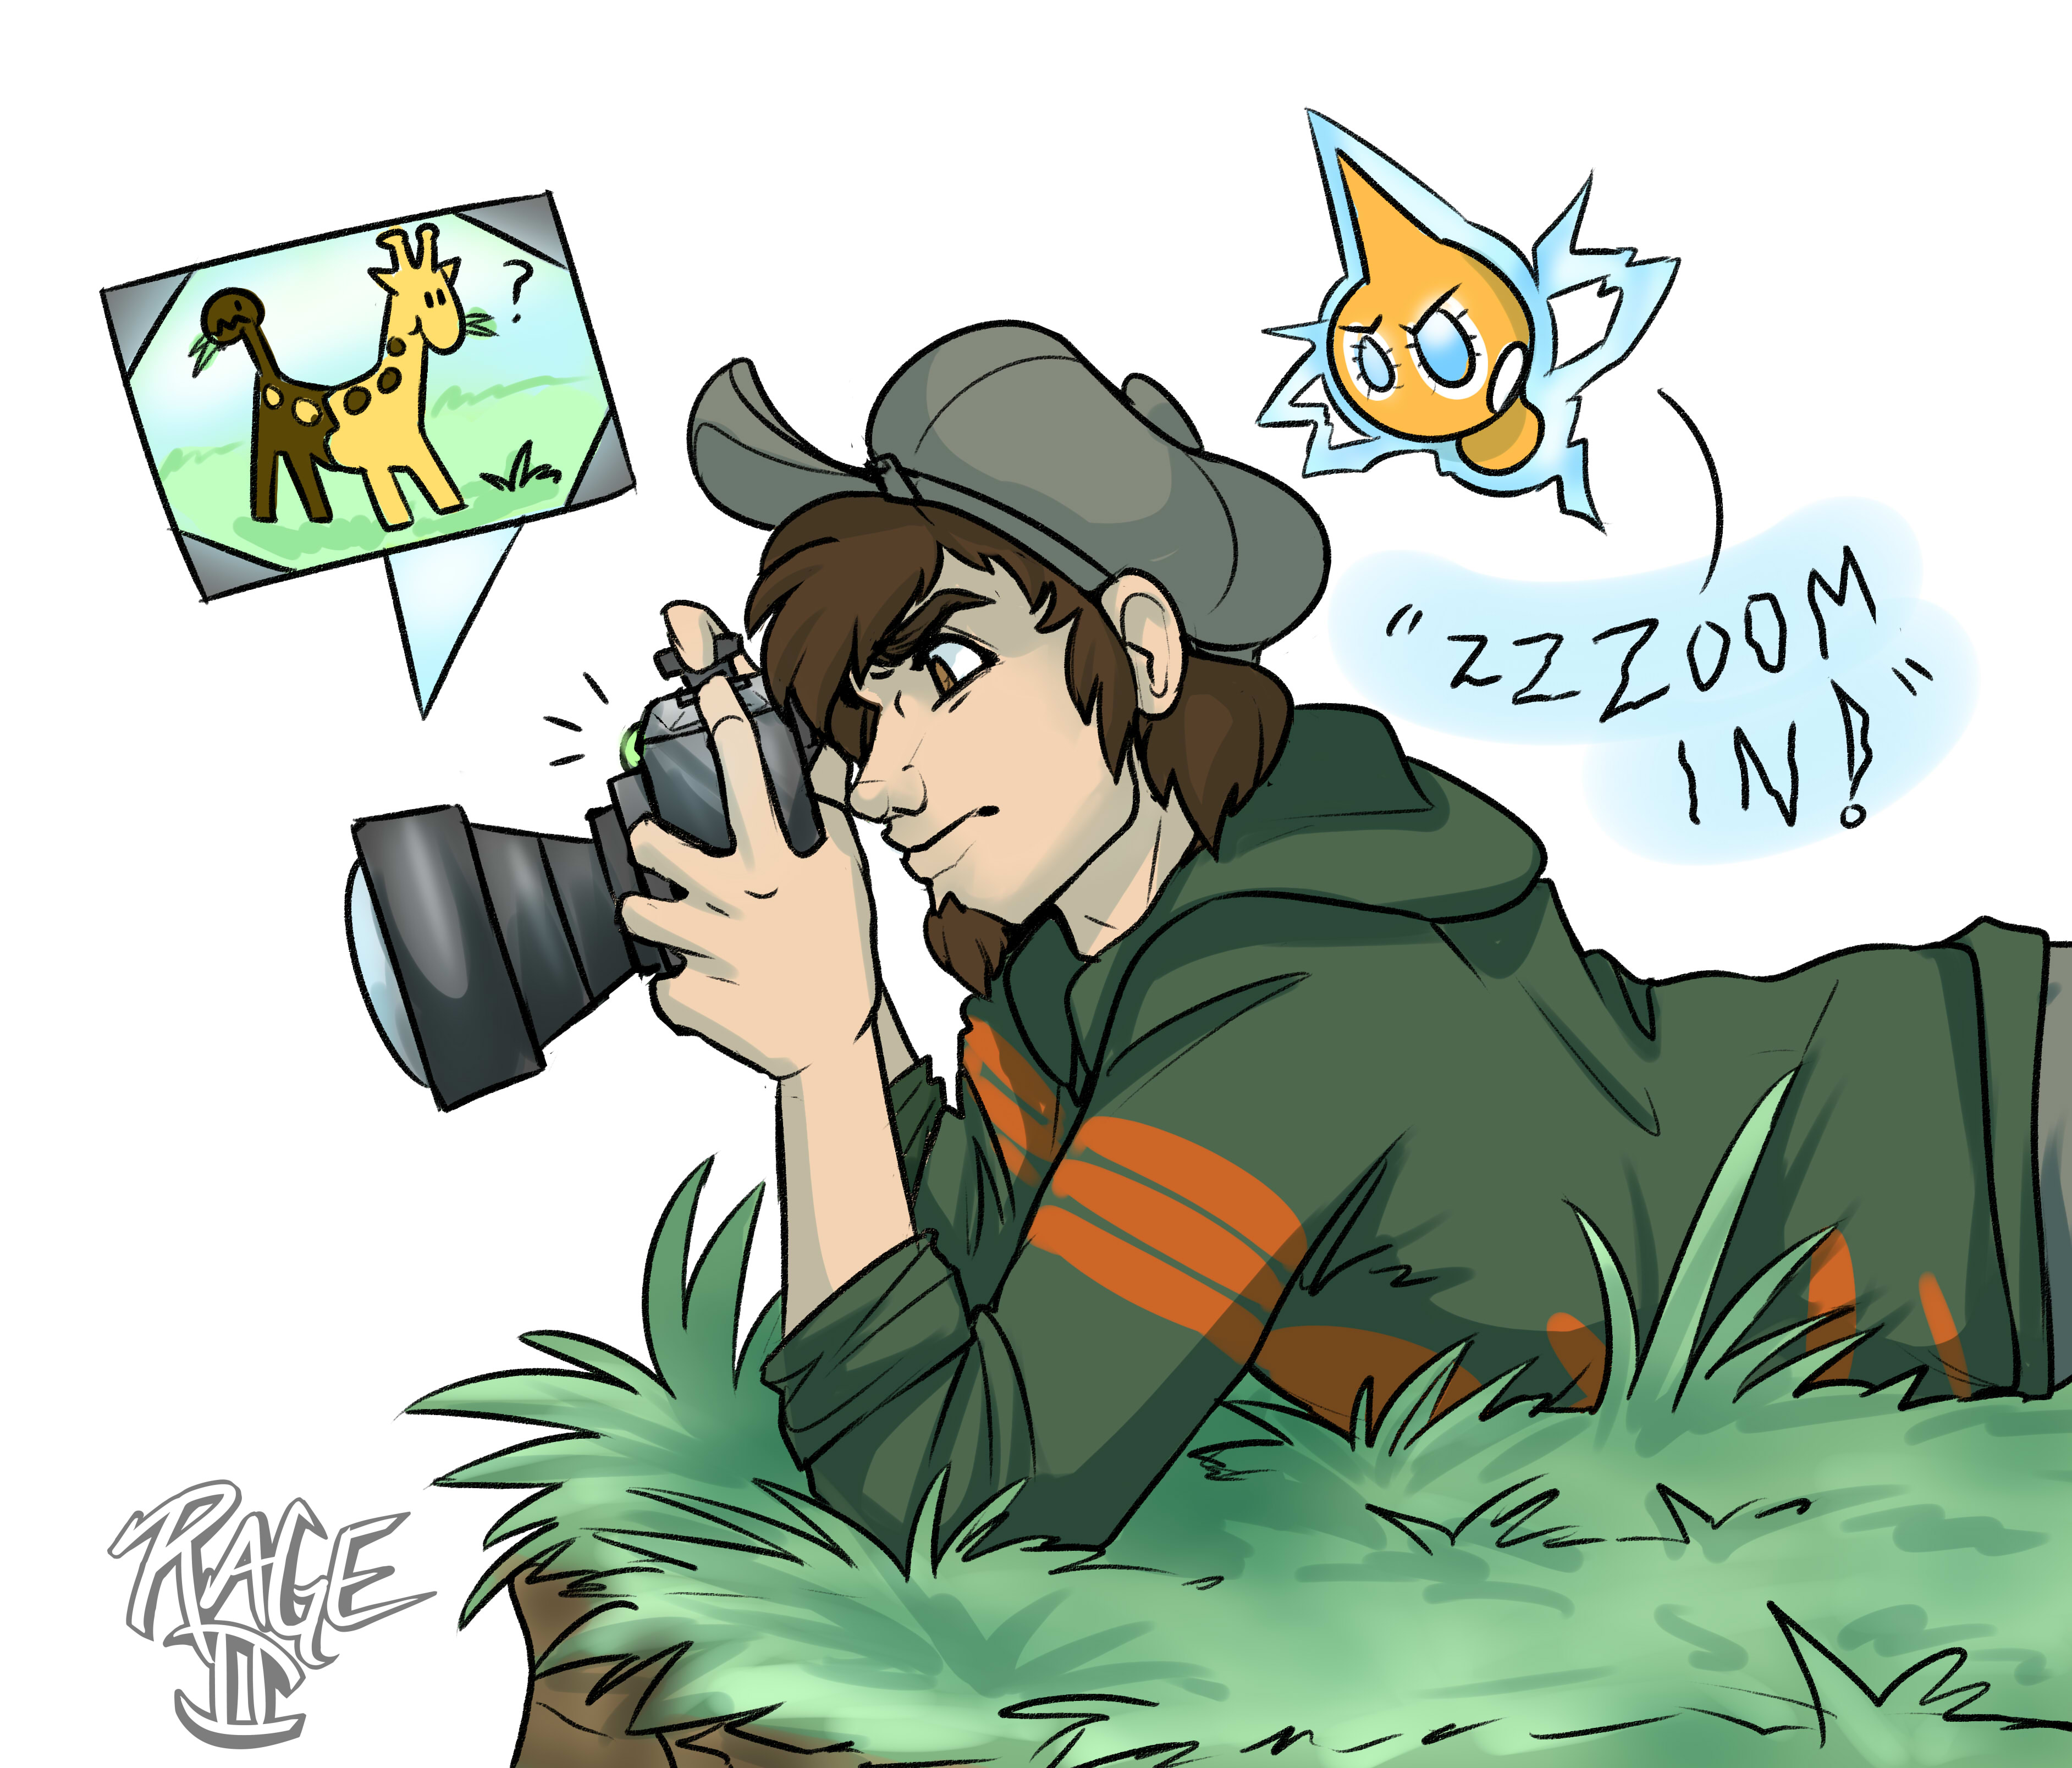 The Wild Photographer in its Natural Habitat by Rage.jpg